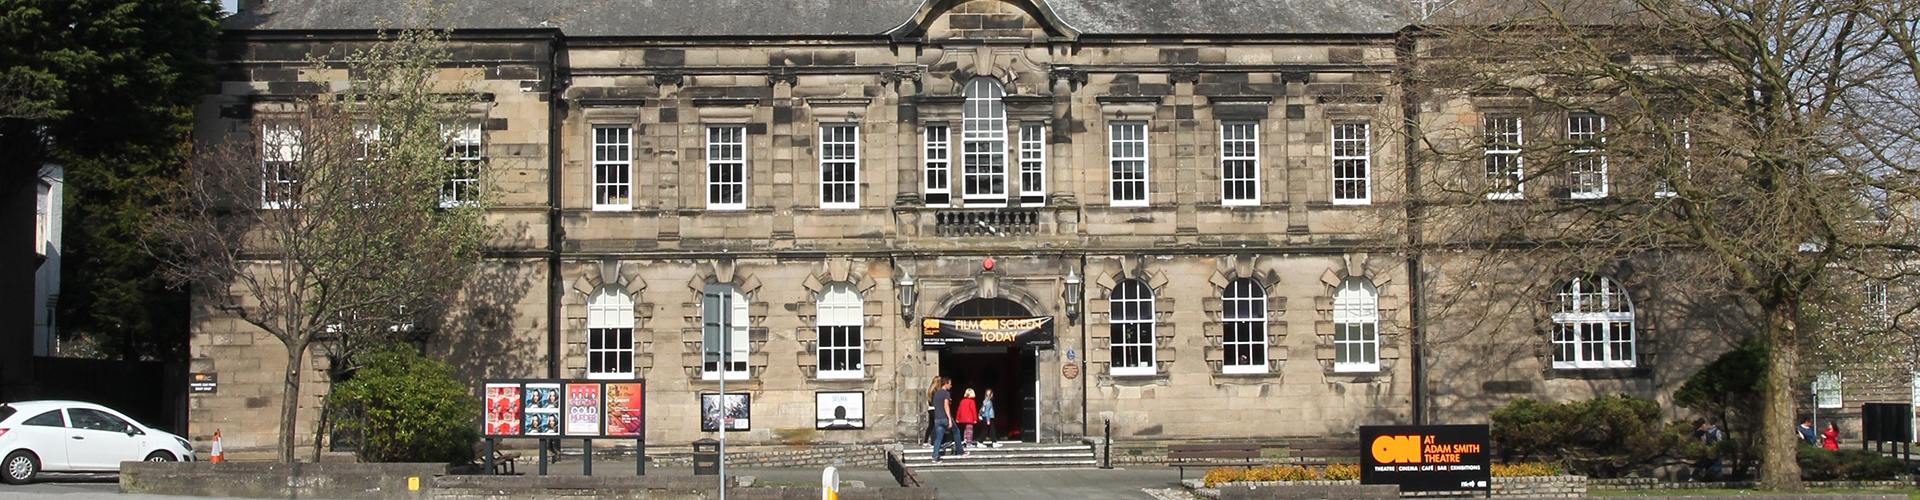 outside view of Adam Smith Theatre, Kirkcaldy